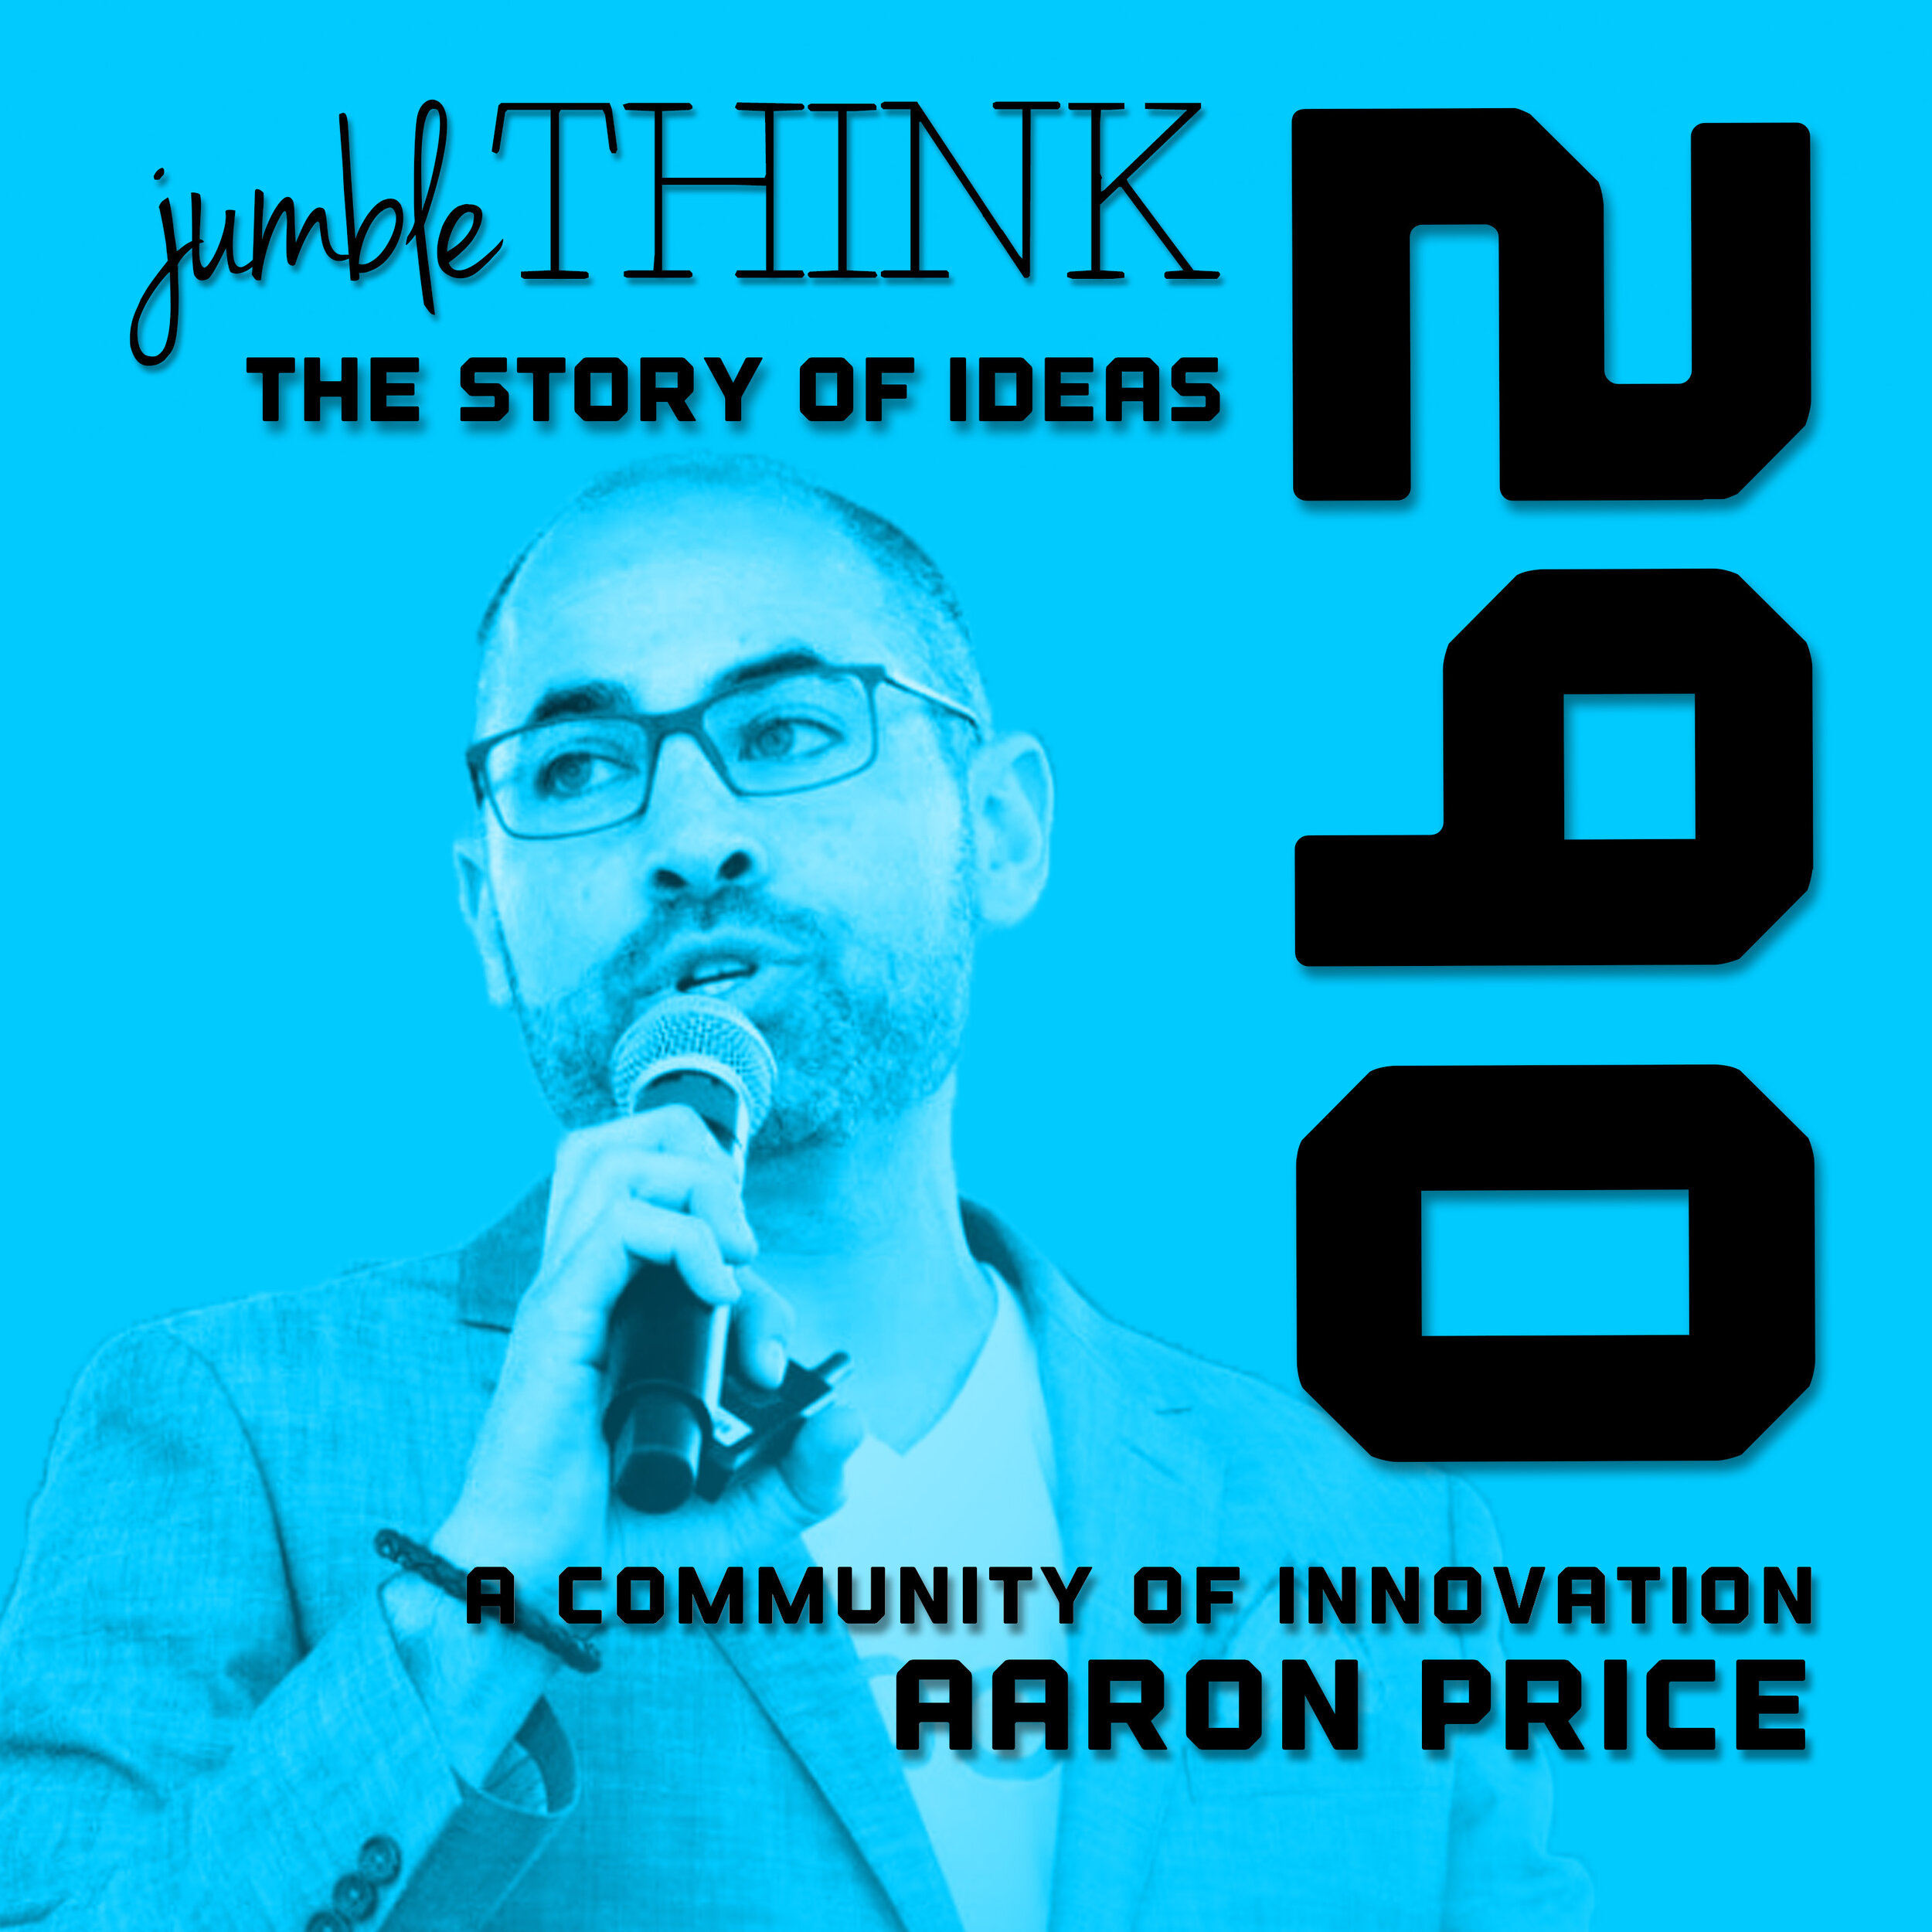 Building a Community of Innovation